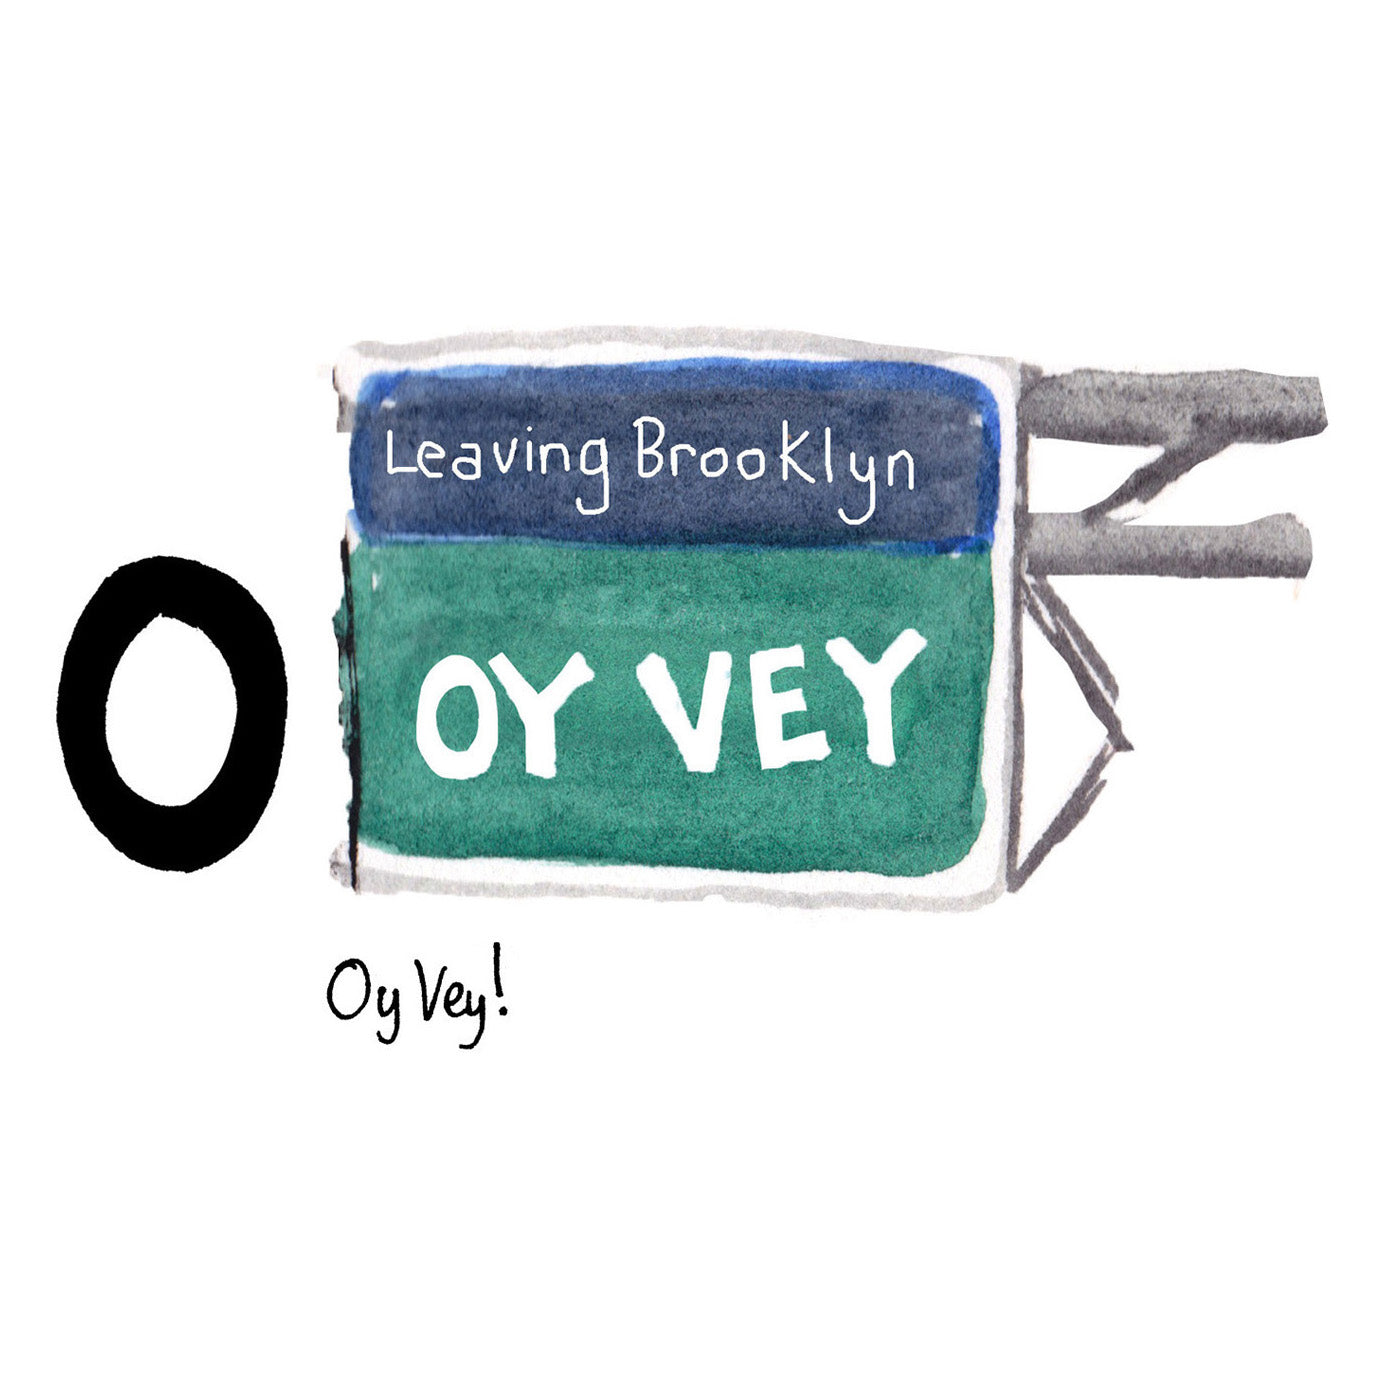 O is for Oy Vey. Oy Vey is a Yiddish phrase or exclamation expressing dismay or grief. 